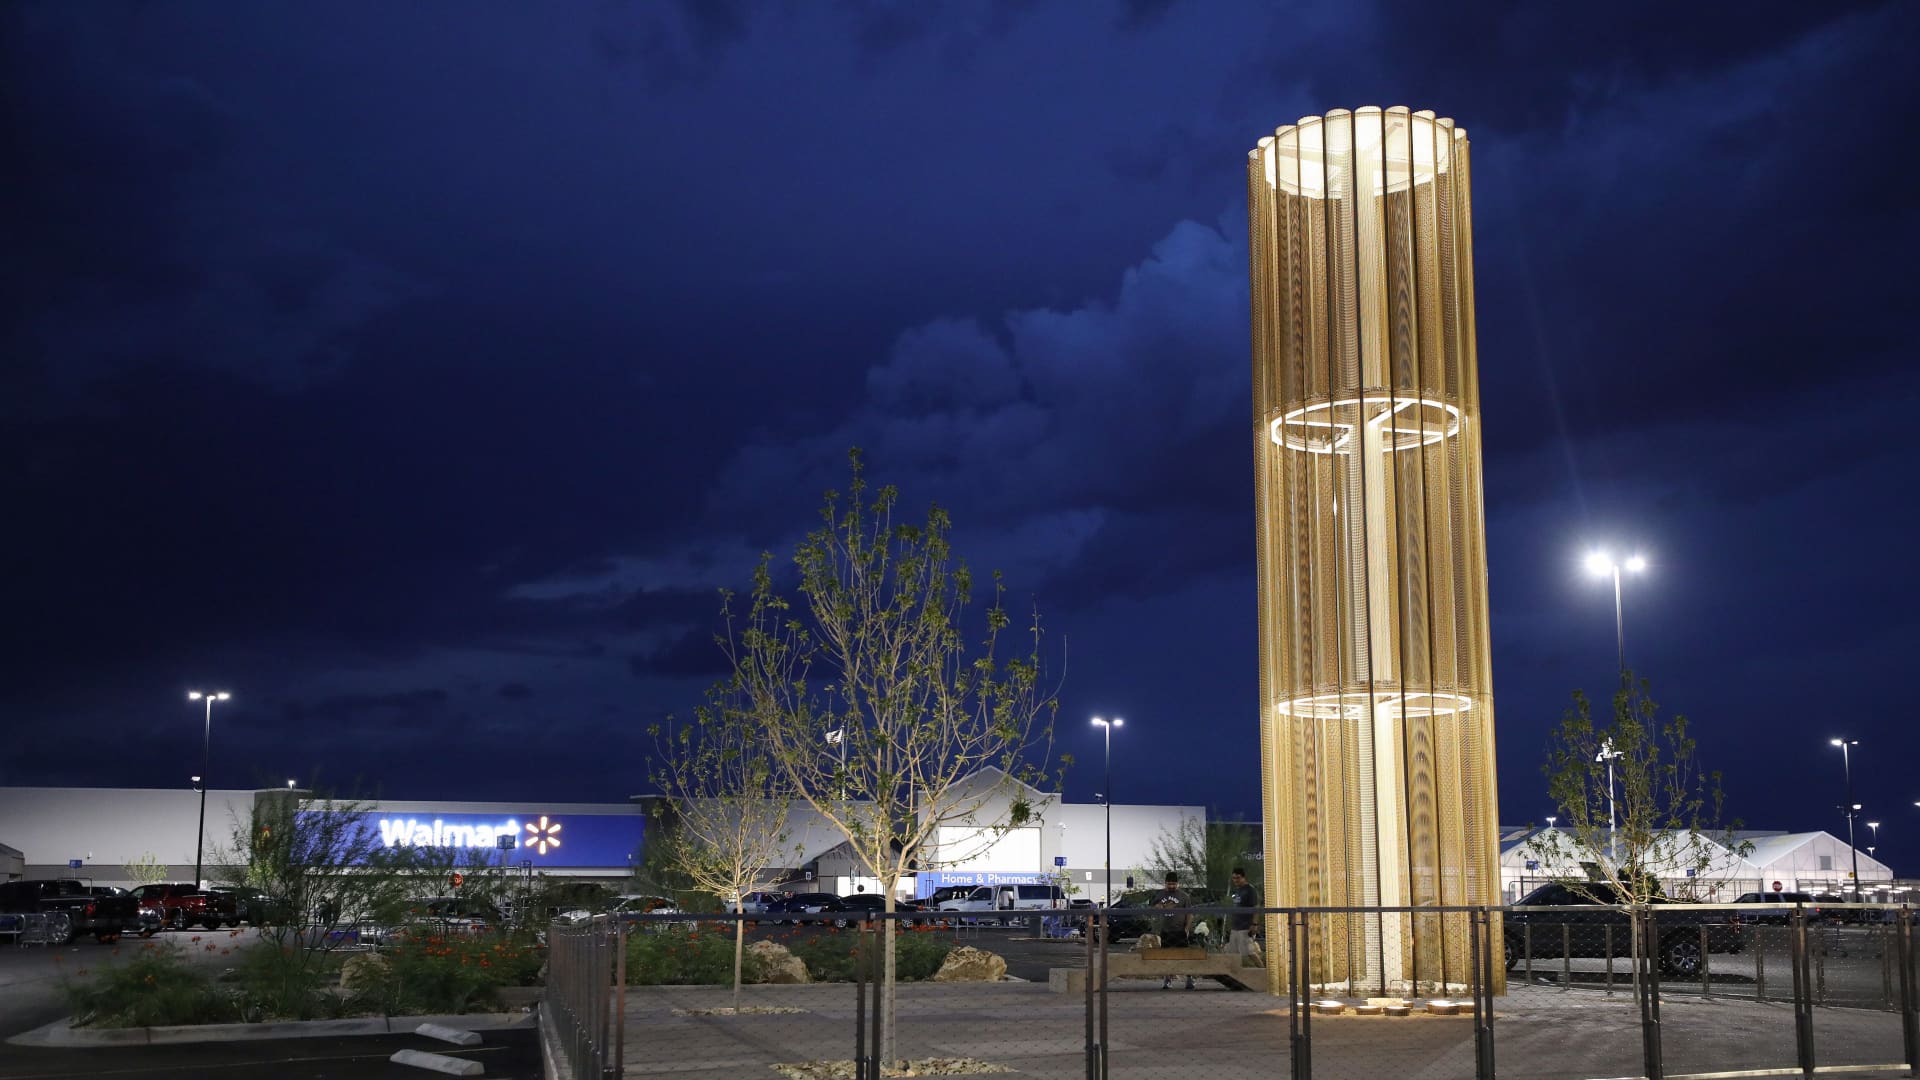 The ‘Grand Candela’ memorial honoring victims shines at dusk in the parking lot of a Walmart in El Paso, Texas.